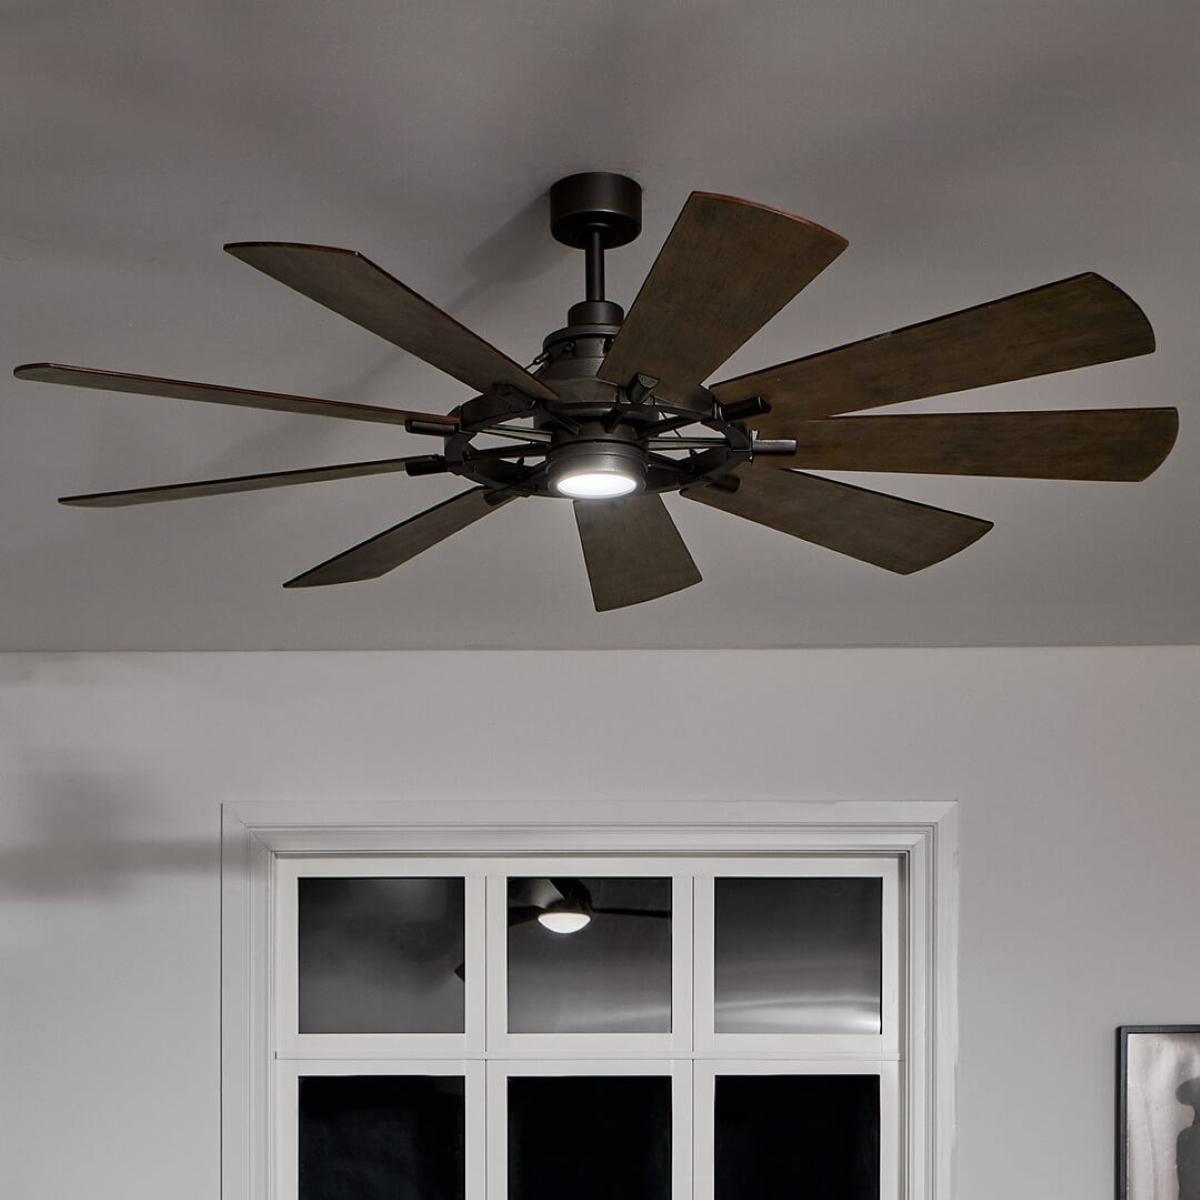 Gentry 65 Inch Farmhouse Windmill Outdoor Ceiling Fan With Light, Wall Control Included